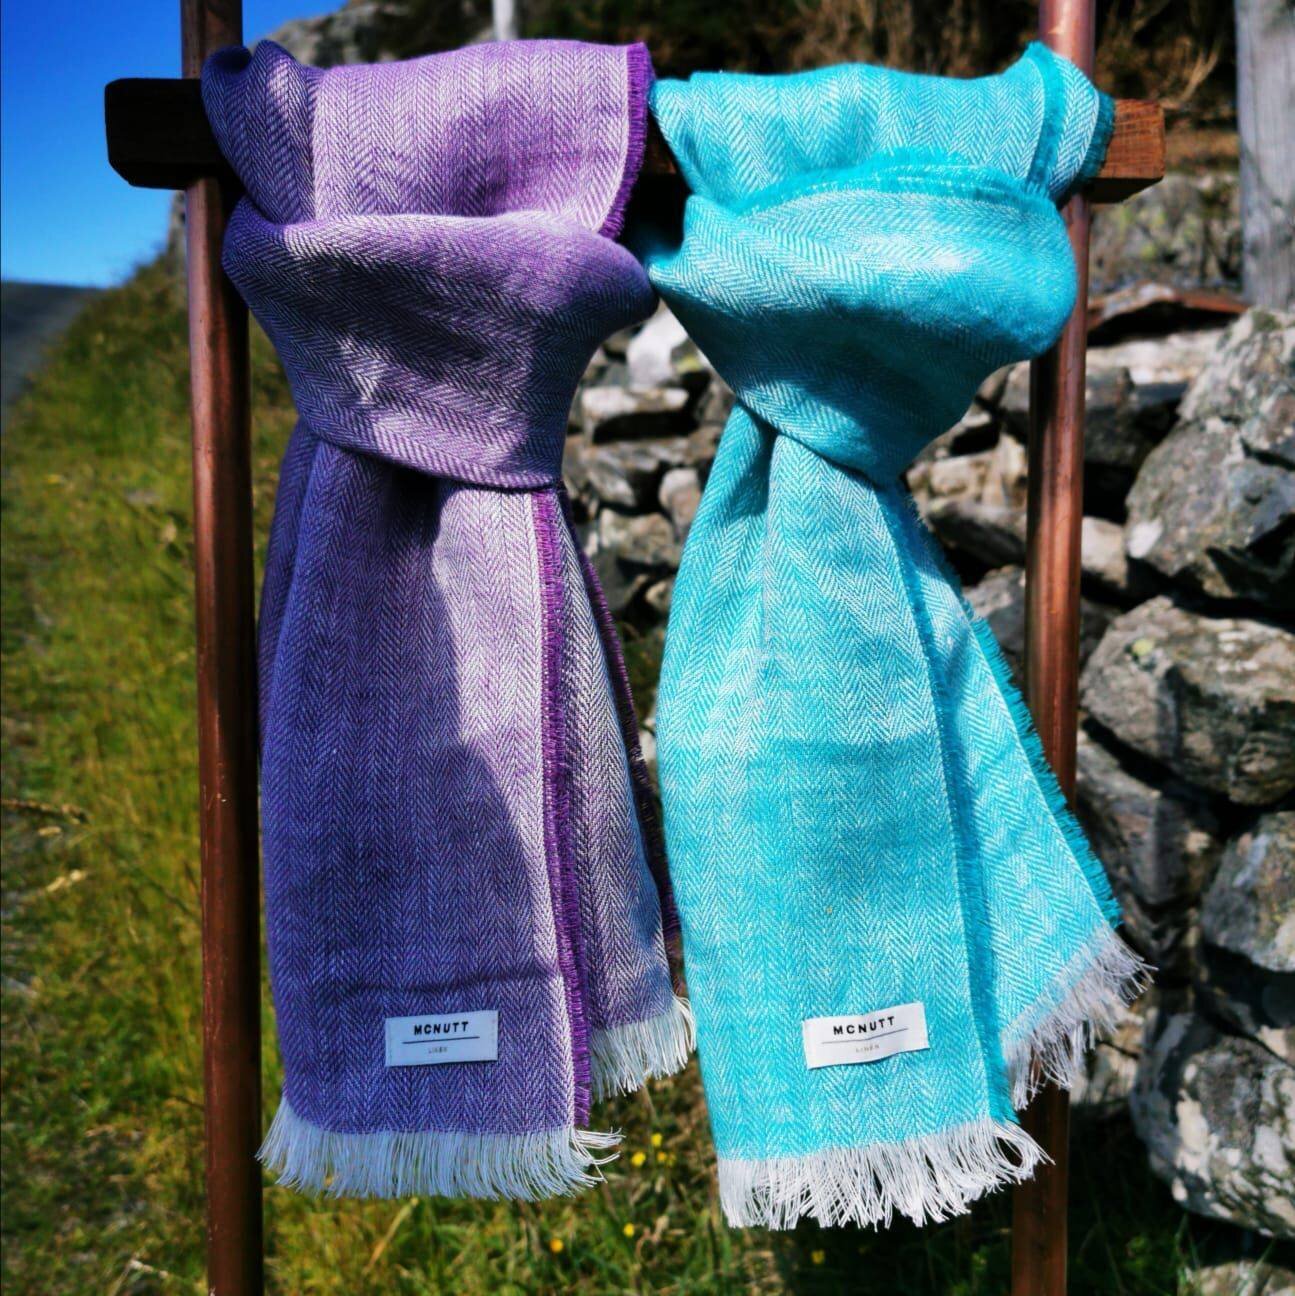 Looking for a lightweight, cooling accessory to add to your summer outfits?☀️ 

We have a wide range of 100% Irish linen scarves, ideal for complementing your summer look! 

#mcnuttofdonegal #nothingfeelsbetter #lovelinen #irishlinen #mcnuttlinen #na